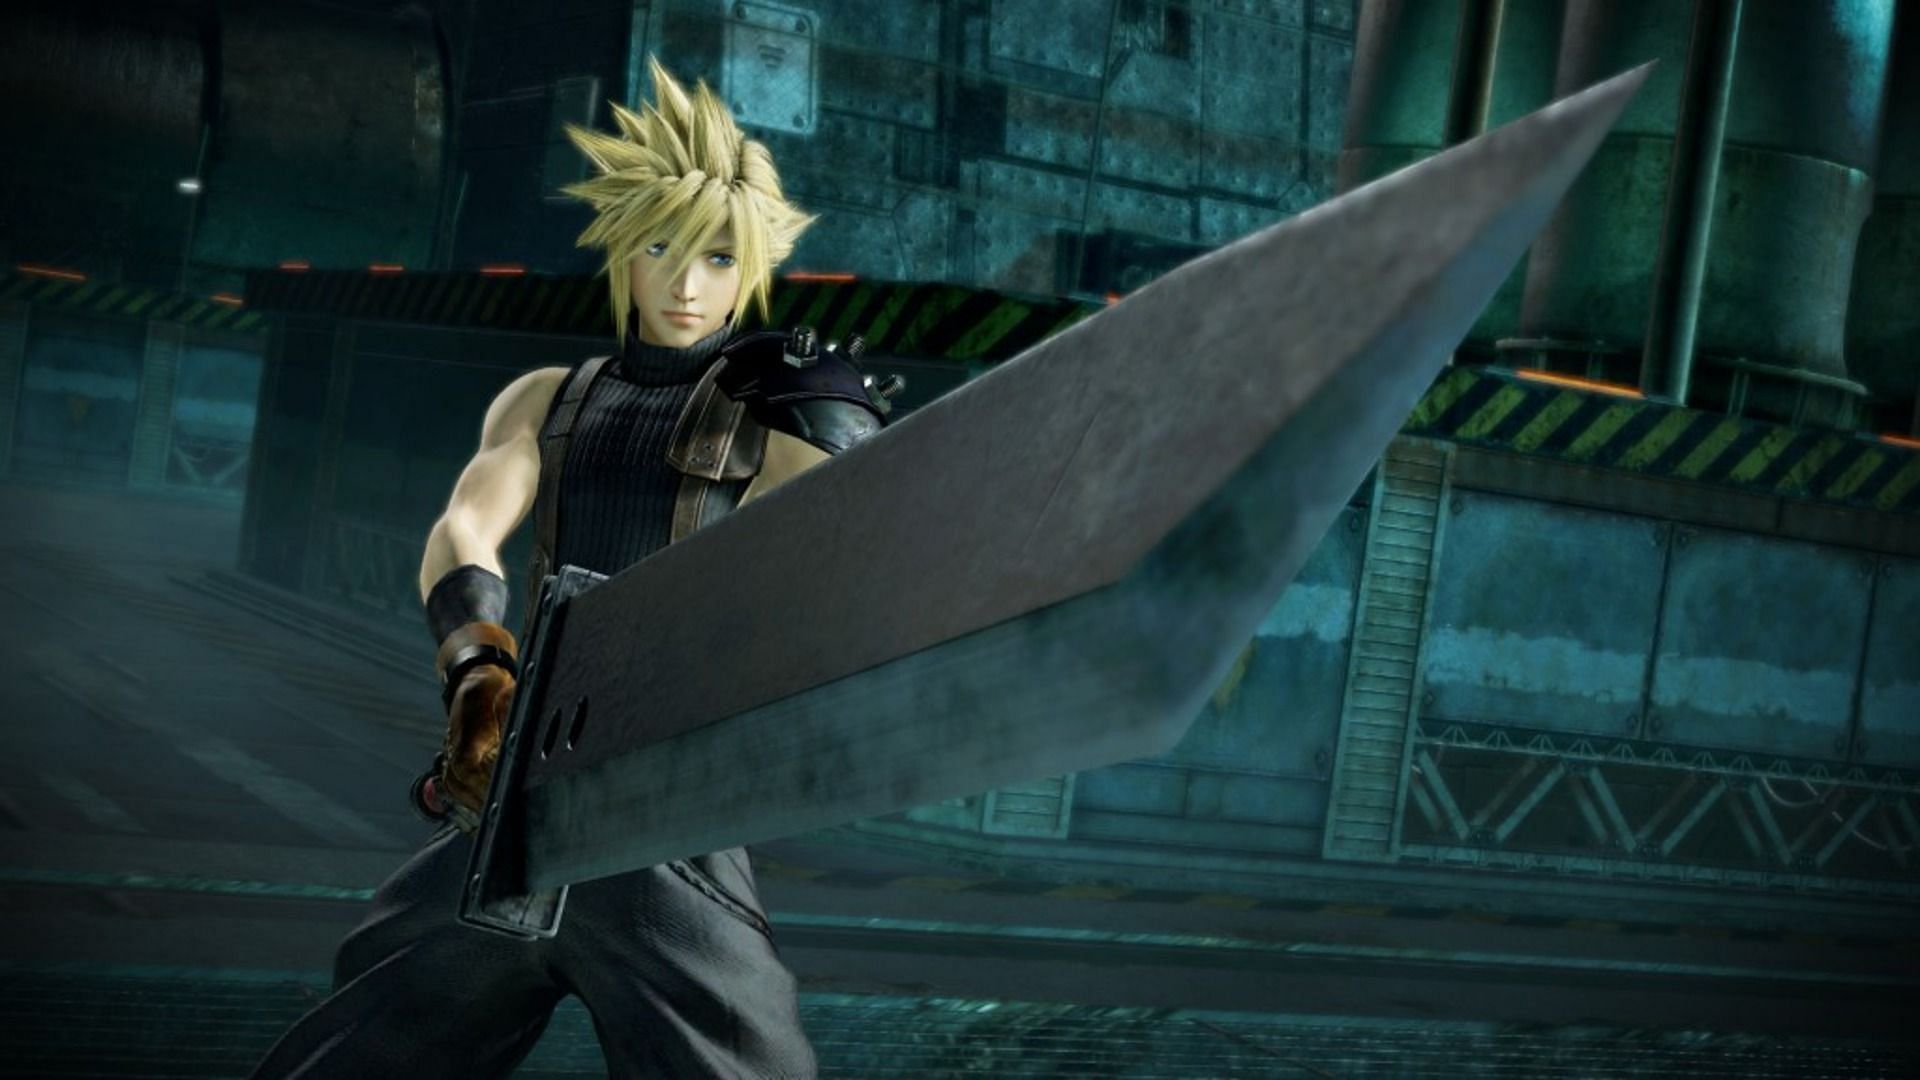 Male video game characters - Cloud Strife (Image via Square Enix)